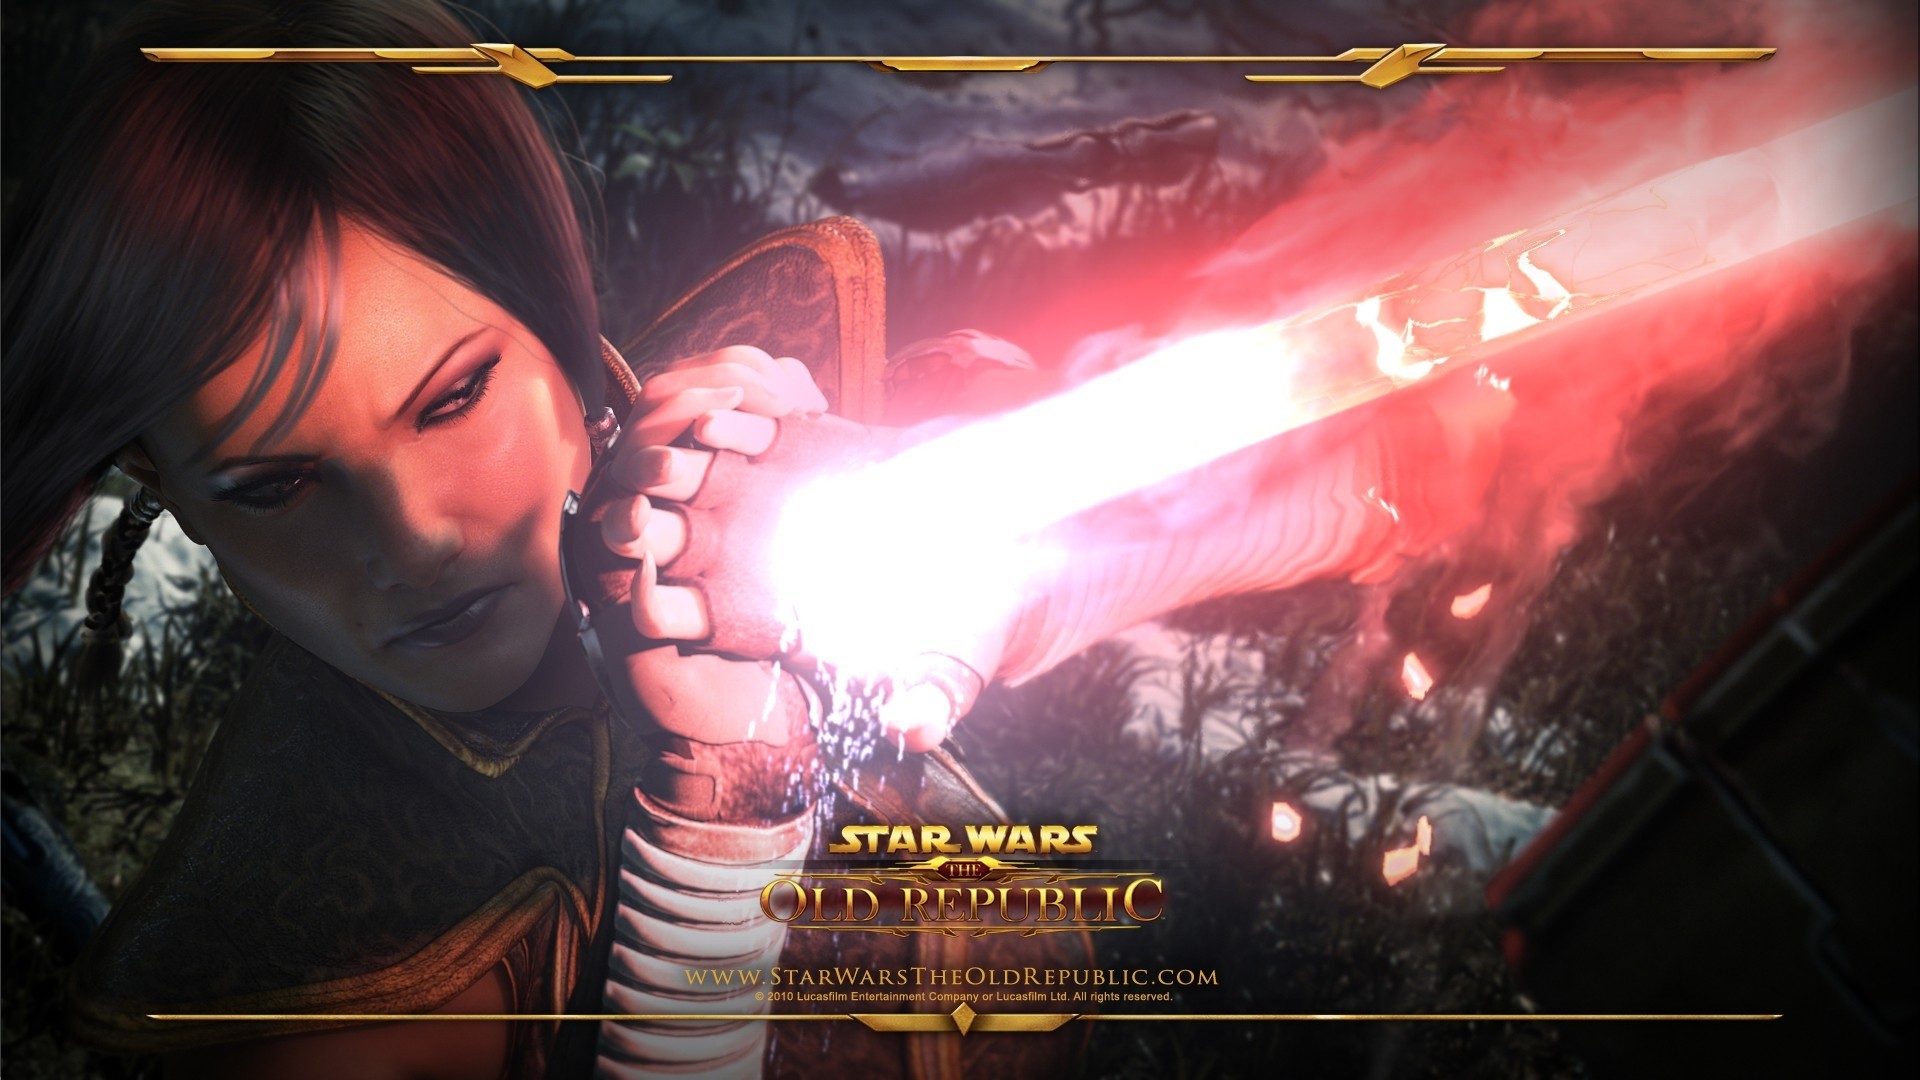 1920x1080 Wallpaper Star wars the old republic, Girl, Magic, Look, Hands HD, Picture,  Image